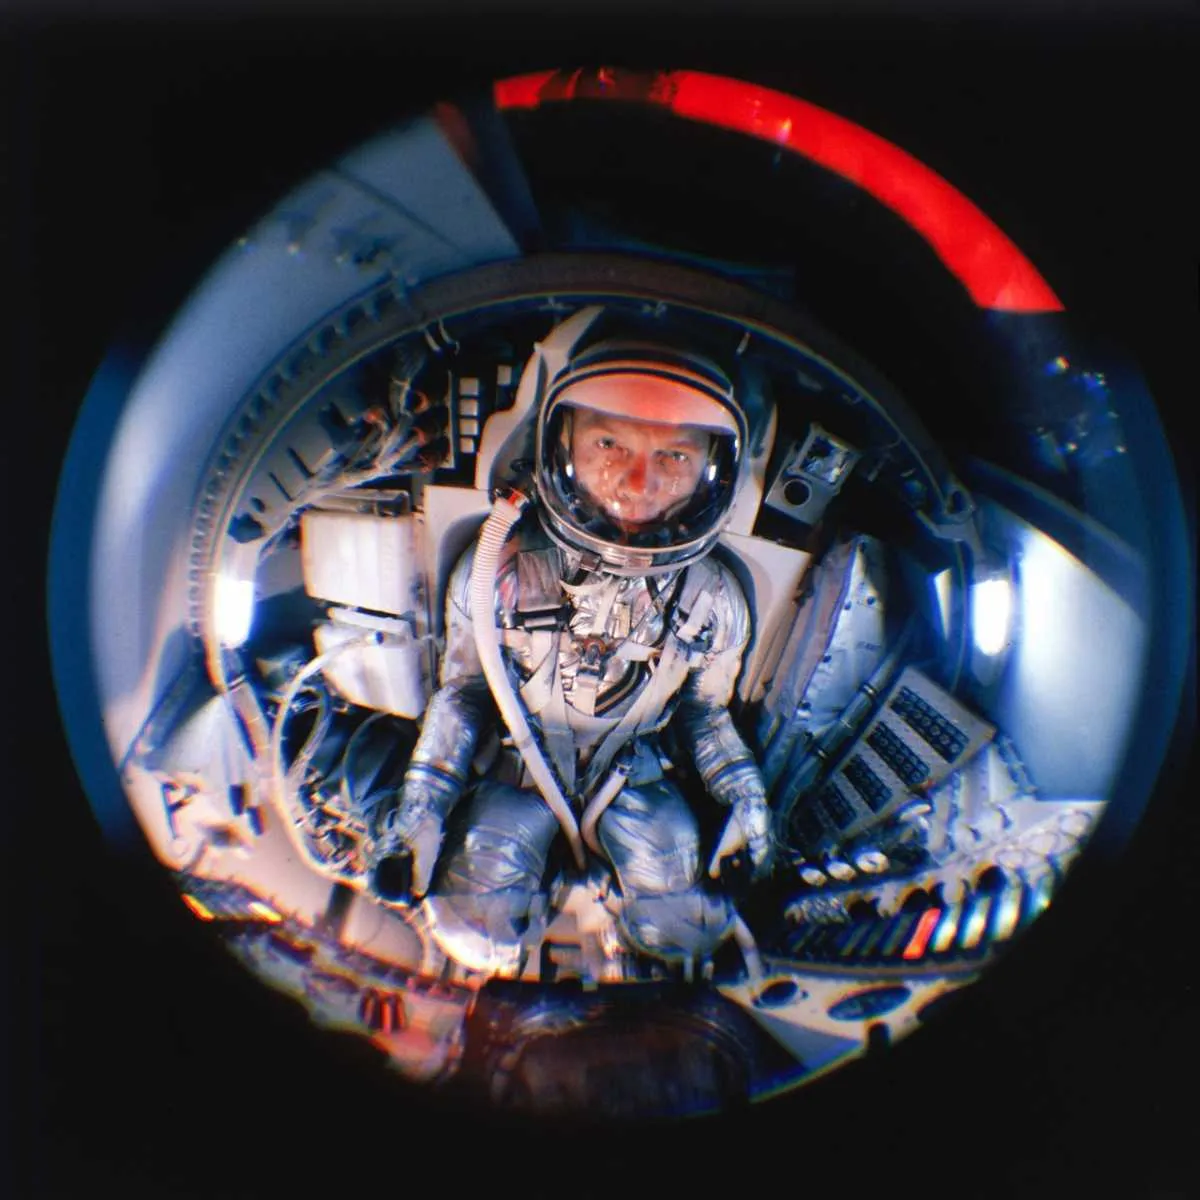 Fish eye view of Project Mercury astronaut John Glenn training © Morse/Life Magazine/The LIFE Picture Collection/Getty Images)